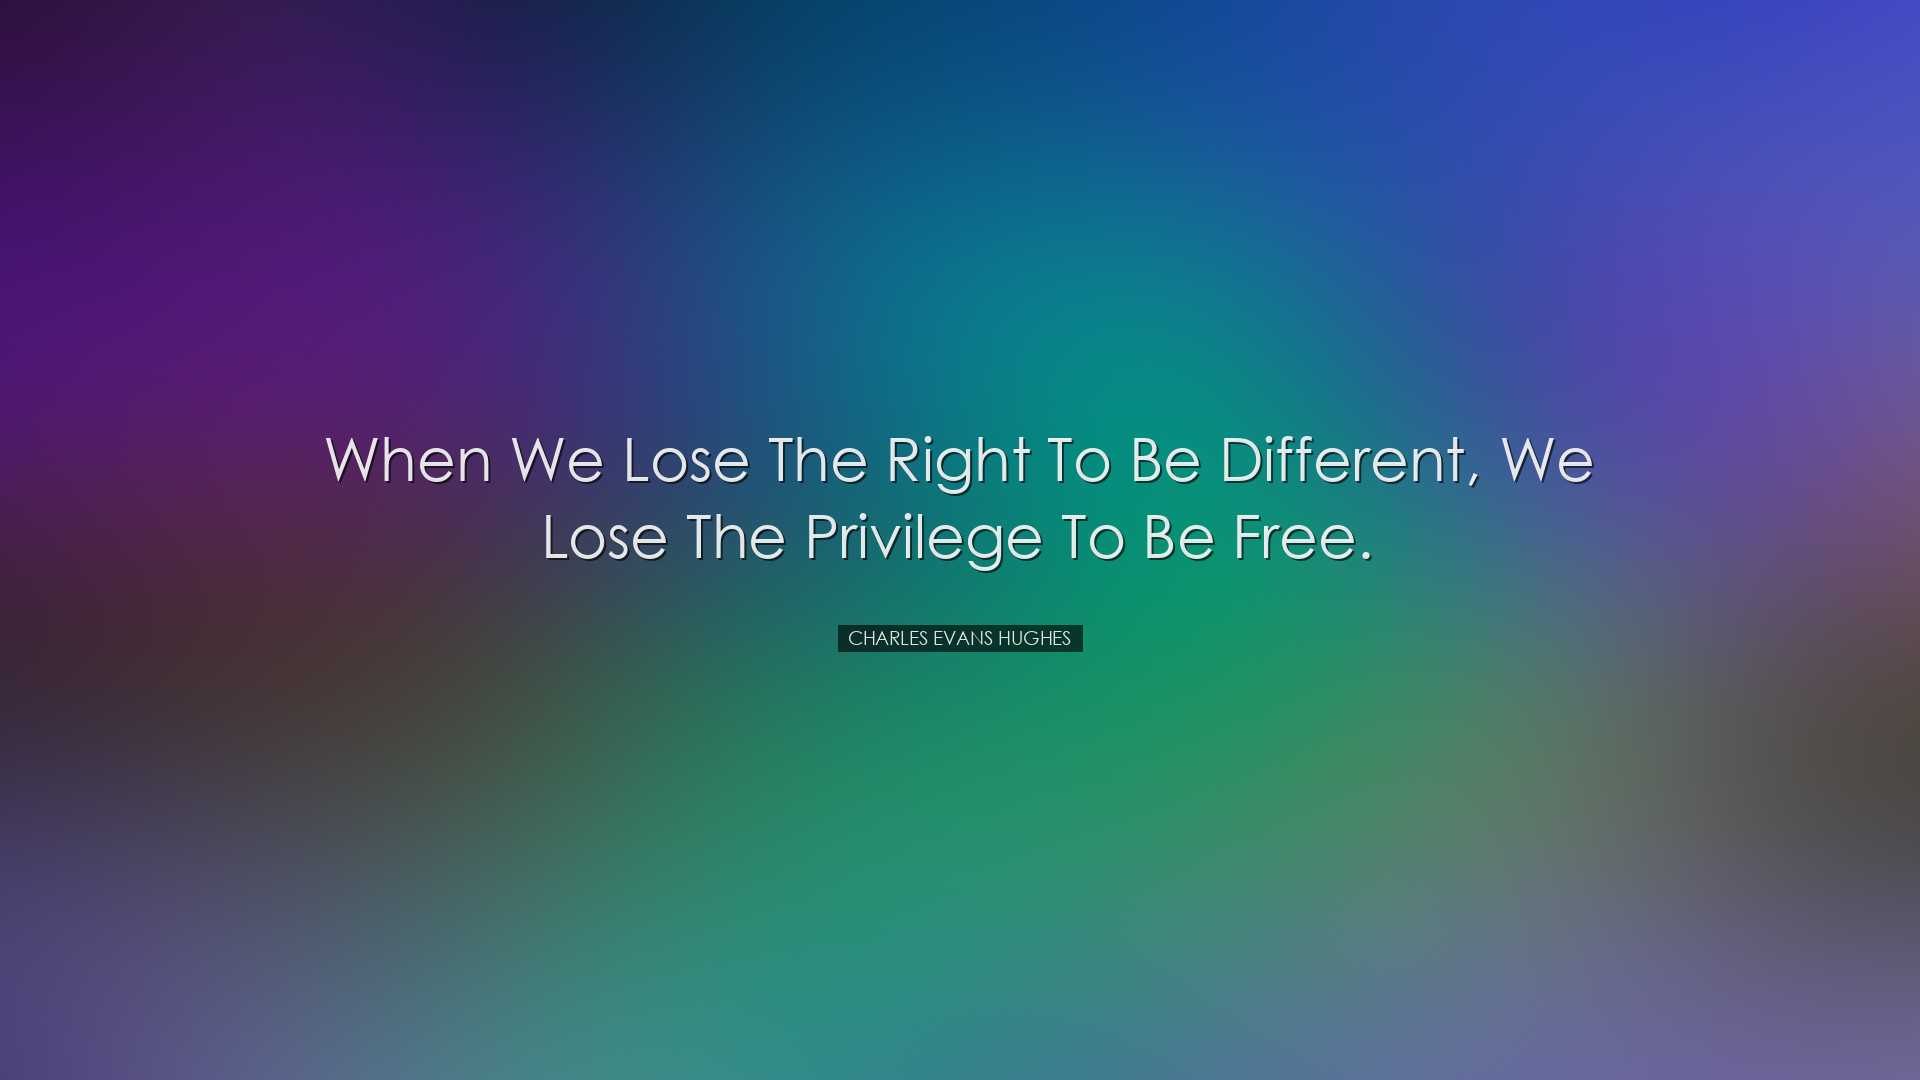 When we lose the right to be different, we lose the privilege to b